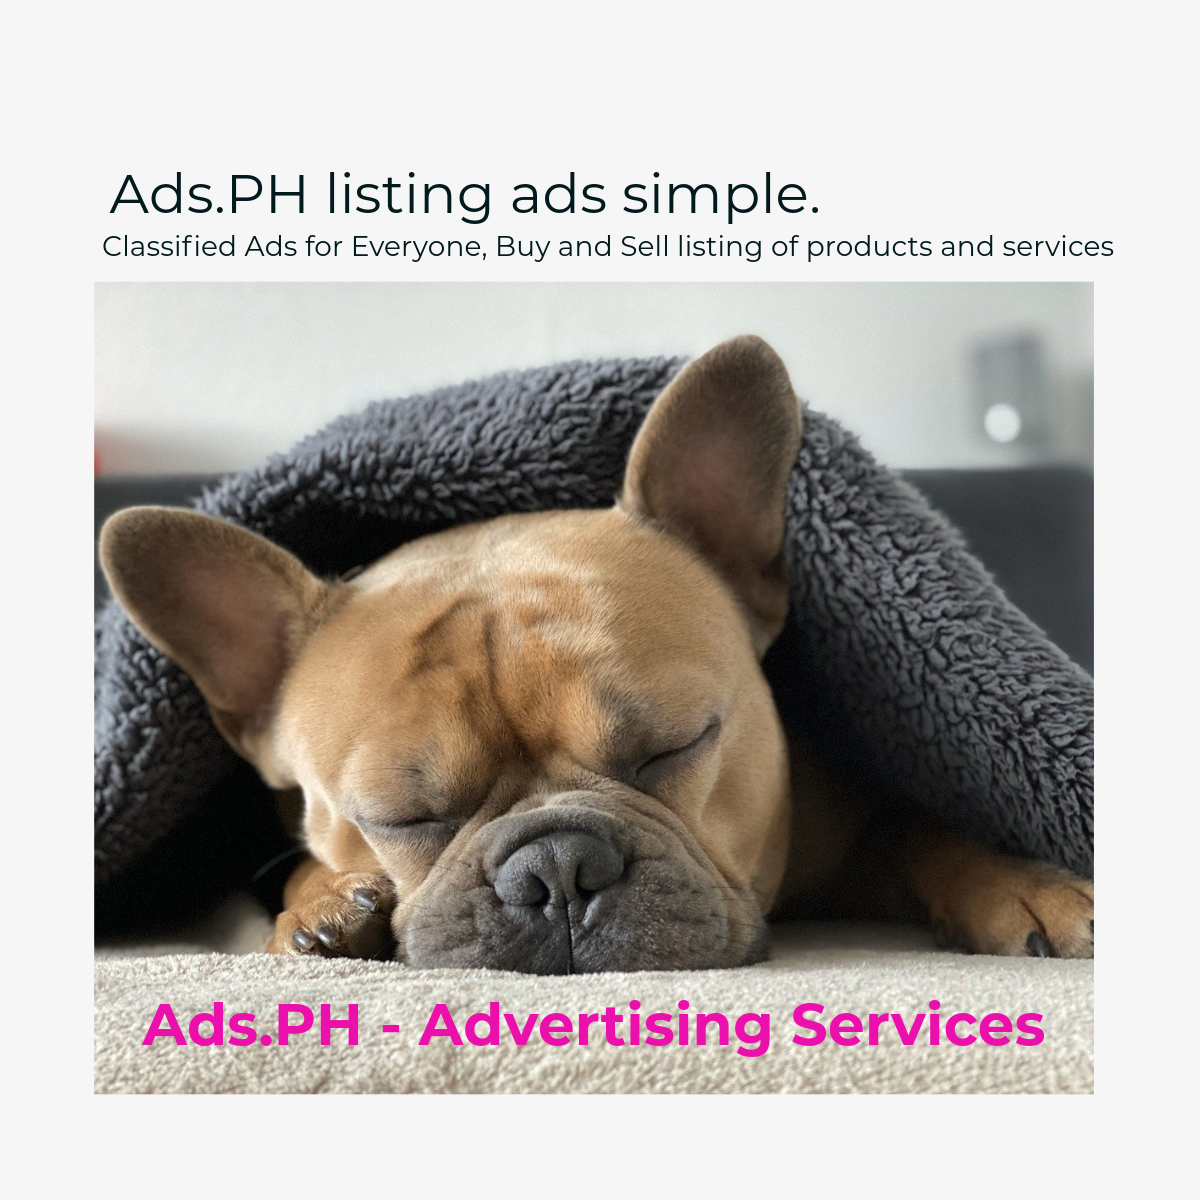 Ads.PH Back Online After Yesterday’s Downtime